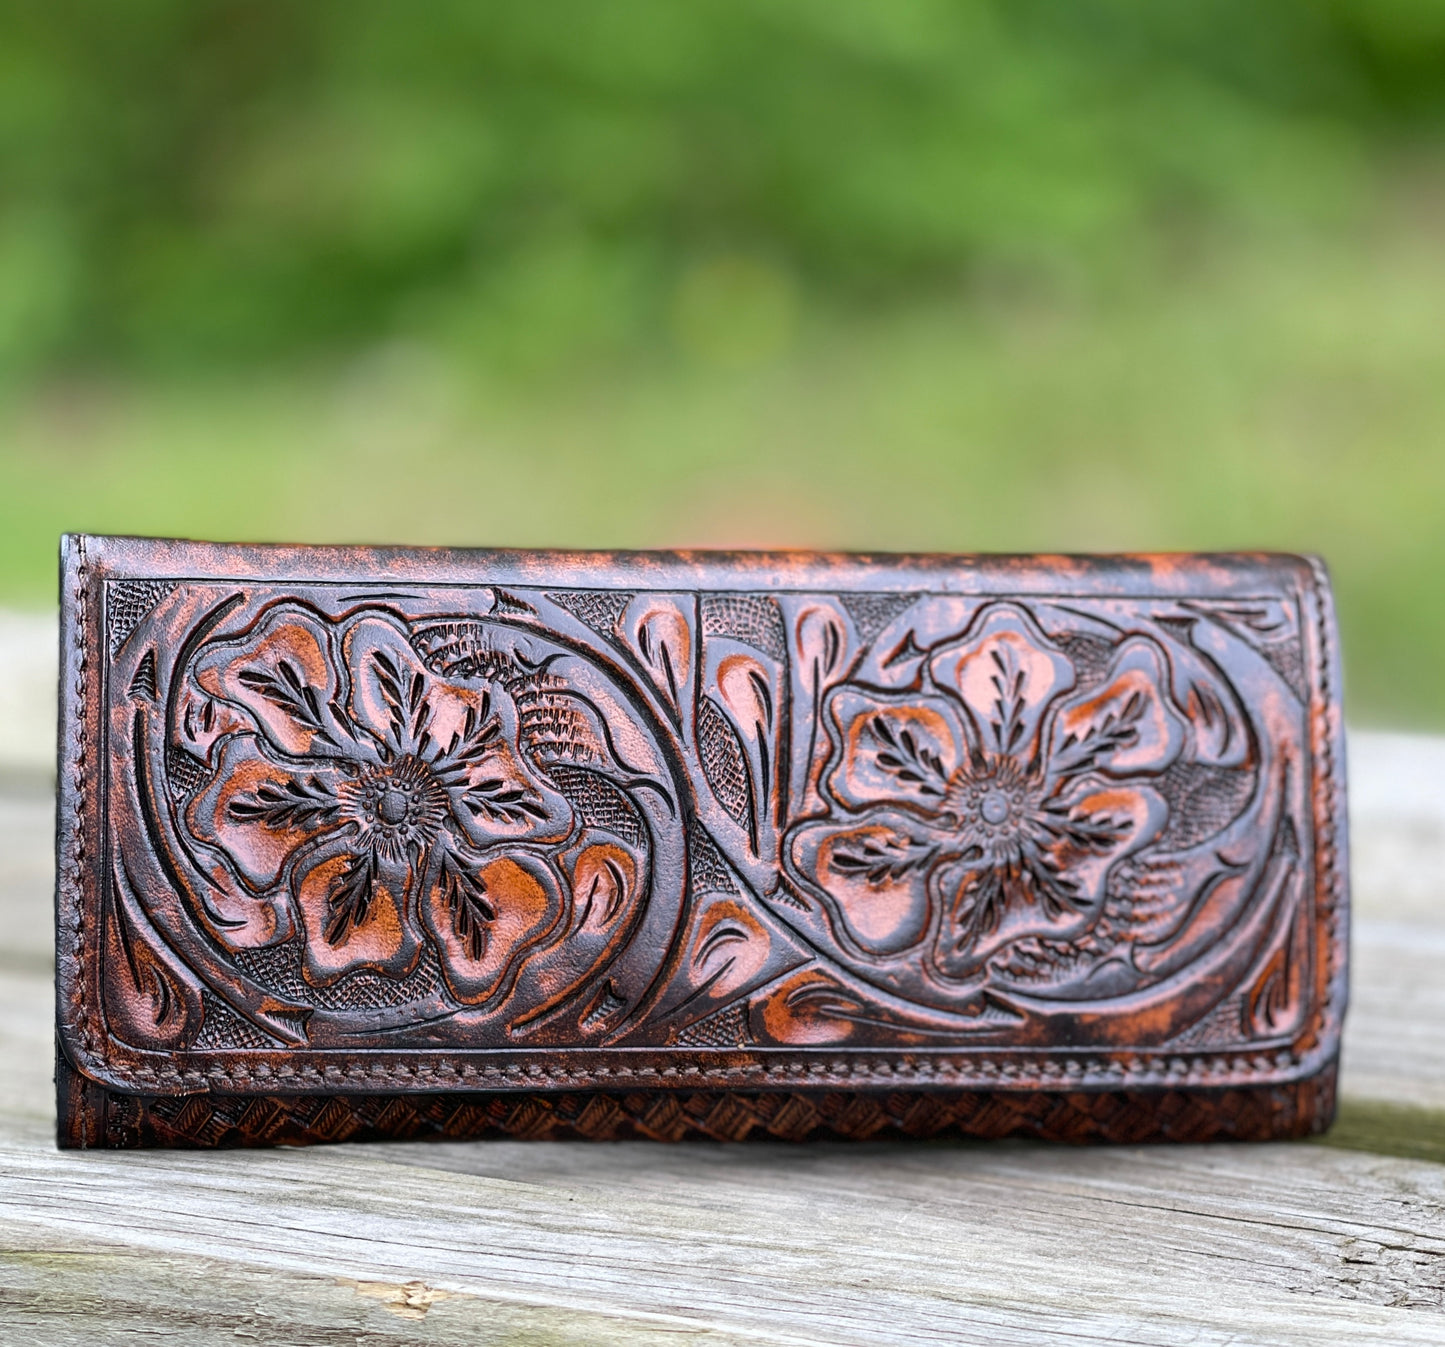 Hand Tooled Leather Wallet, "WALLET" by ALLE - ALLE Handbags